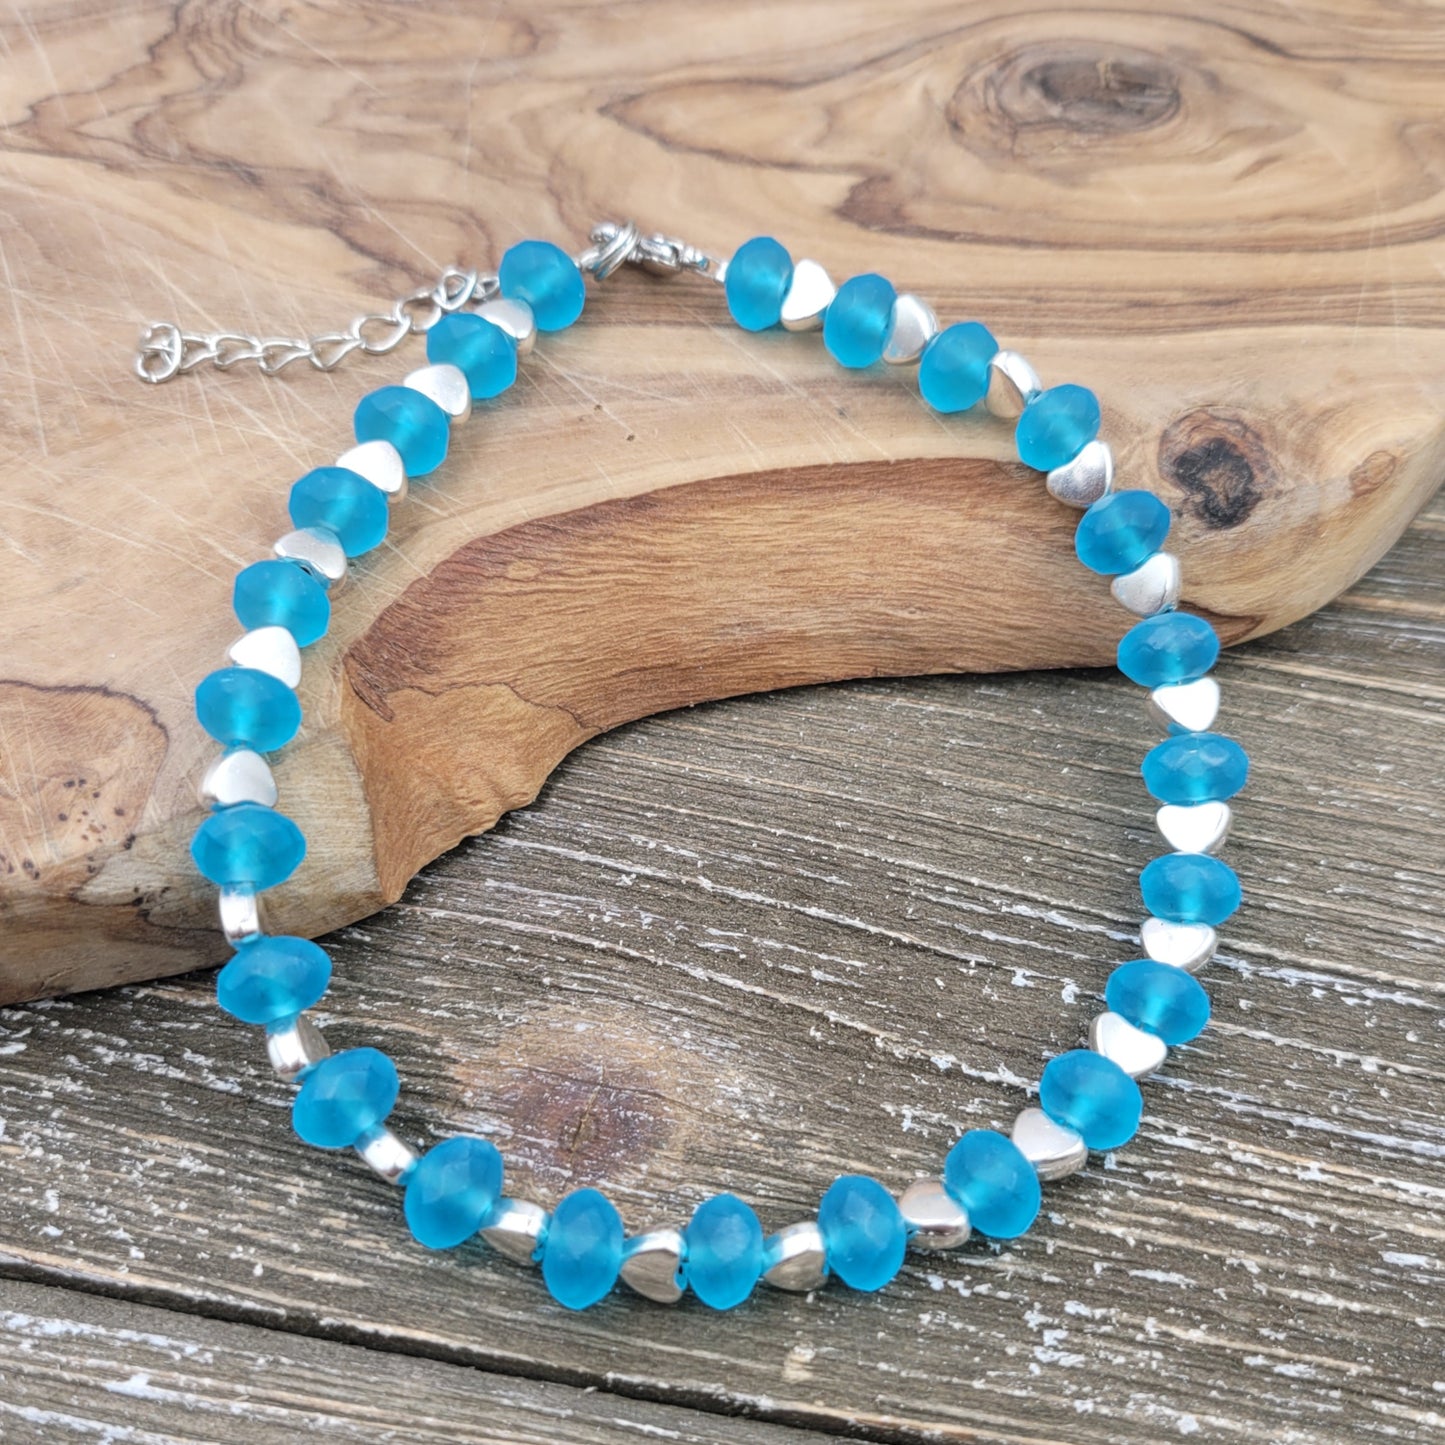 BESHEEK Frosted AQUA BLUE Faceted Crystal Artisan Beaded Anklet with Extension | Handmade Hypoallergenic Beach Gala Wedding Style Jewelry